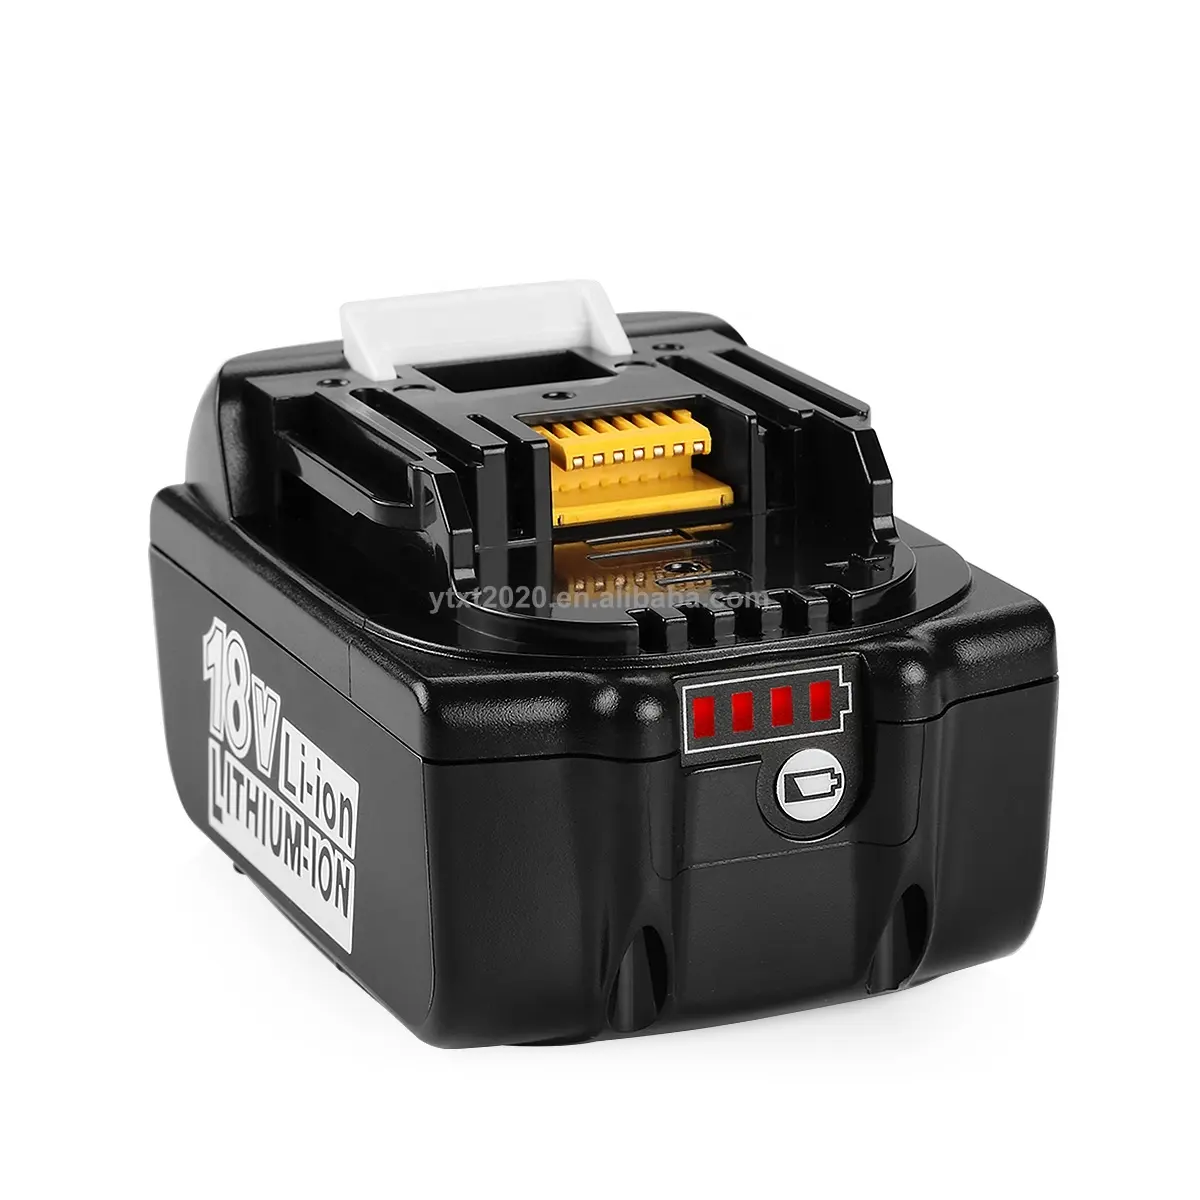 A03 OEM ODM replacement Makita battery pack 18v 5A BL1850 BL1860 For Makita power tool battery